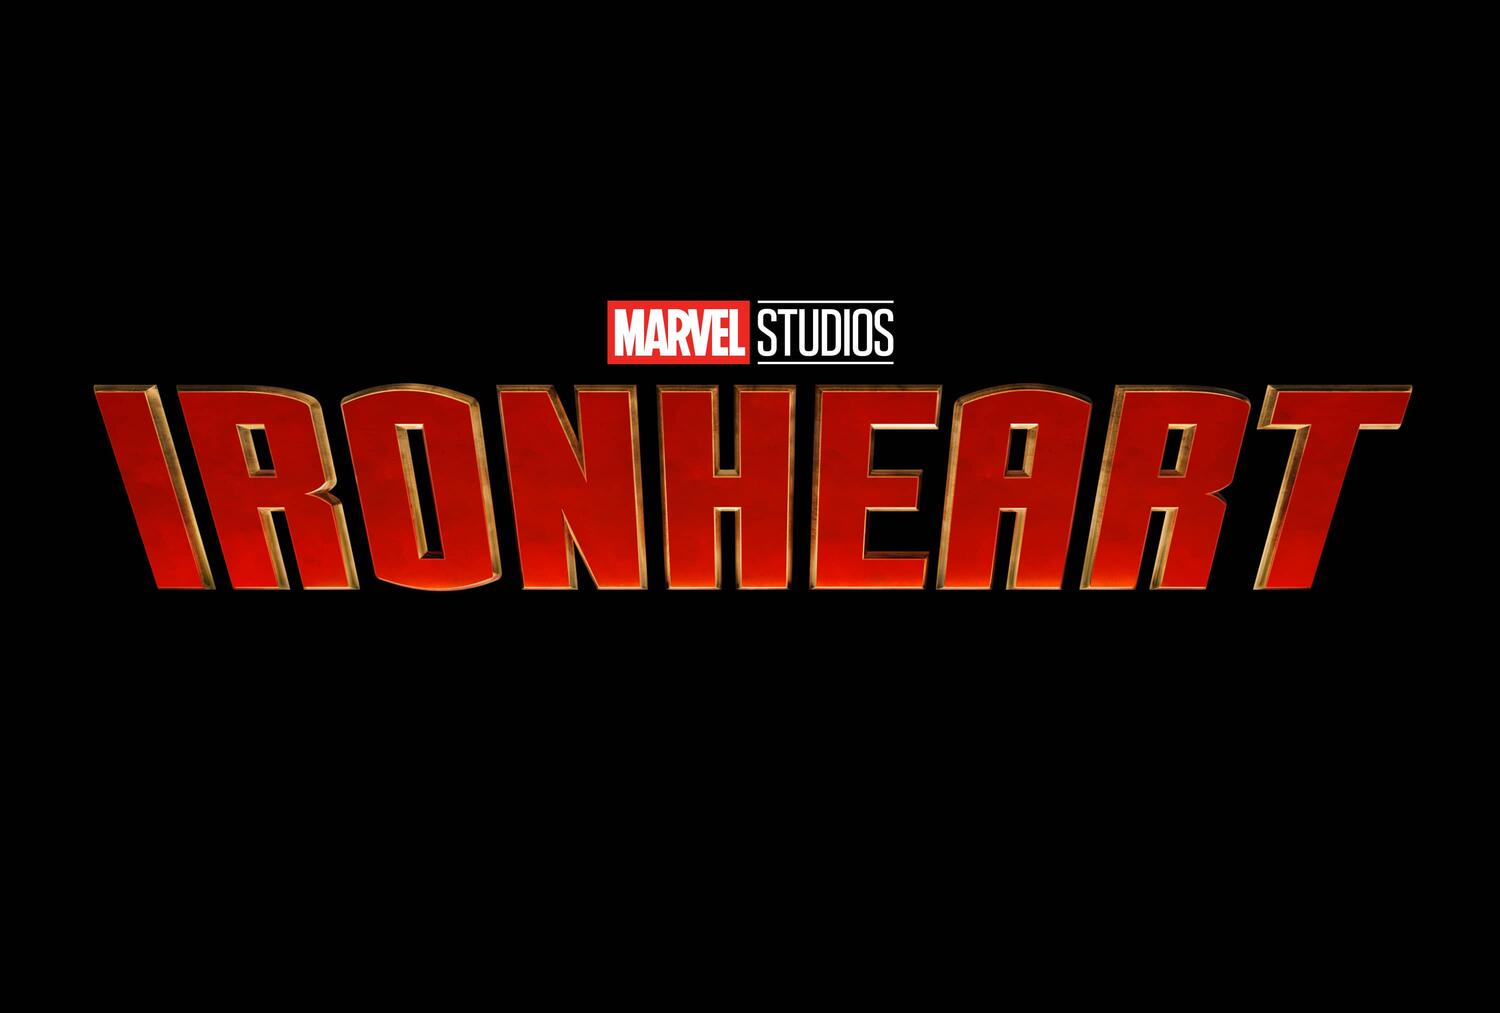 How the “Ironheart” TV Show Fits Into the Marvel Cinematic Universe